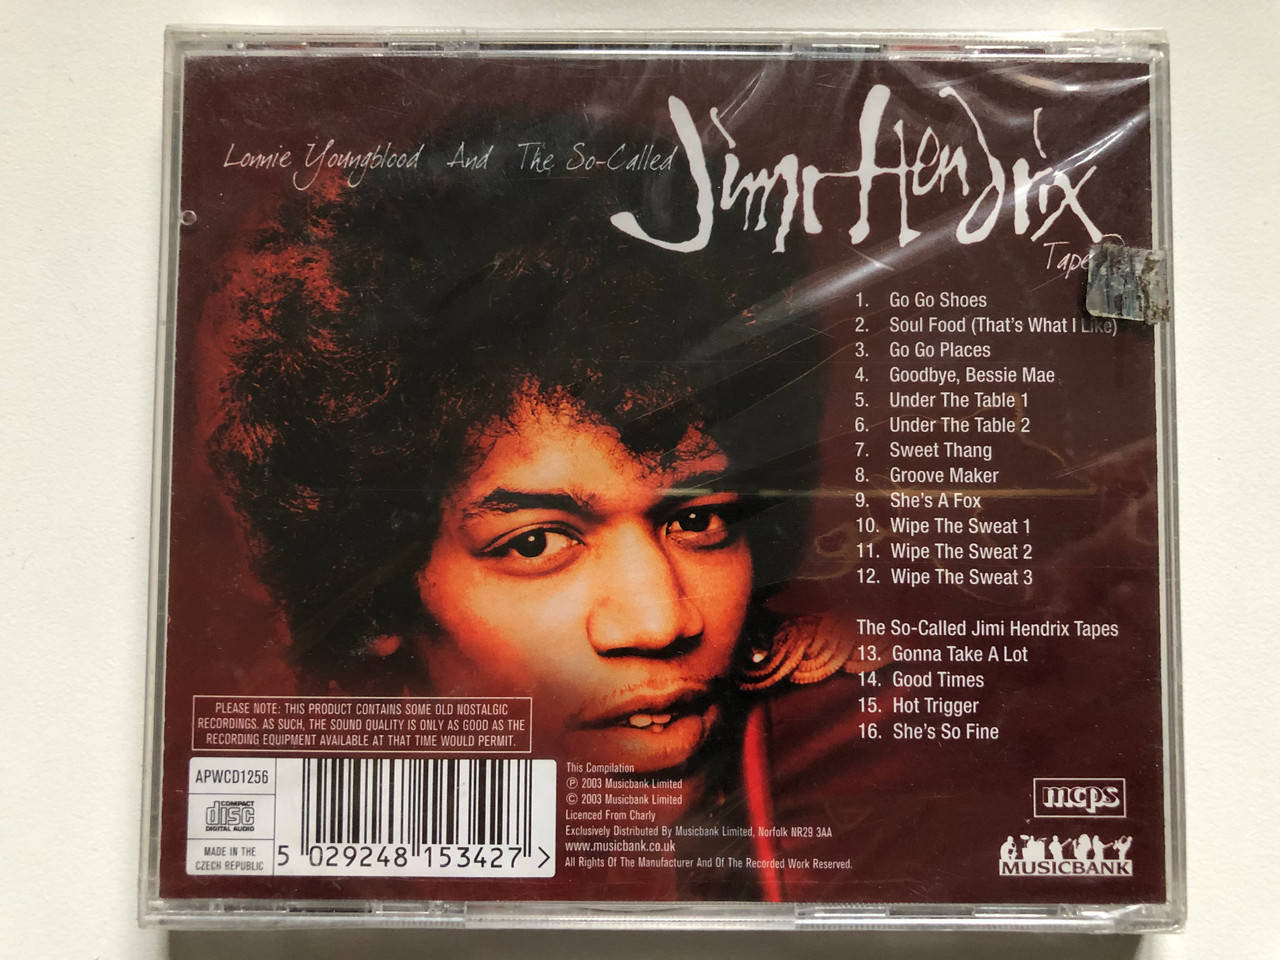 https://cdn10.bigcommerce.com/s-62bdpkt7pb/products/0/images/233122/Lonnie_Youngblood_And_The_So-Called_Jimi_Hendrix_Tapes_16_Brilliant_Tracks_Including_Sweet_Thang_Go_Go_Places_Hot_Trigger_Good_Times_Gonna_Take_A_Lot_Groove_Maker_Musicbank_Audio_CD_2__35640.1654798272.1280.1280.JPG?c=2&_gl=1*s8nyid*_ga*MjA2NTIxMjE2MC4xNTkwNTEyNTMy*_ga_WS2VZYPC6G*MTY1NDc5NTk2MS40MjcuMS4xNjU0Nzk4MDc0LjU2